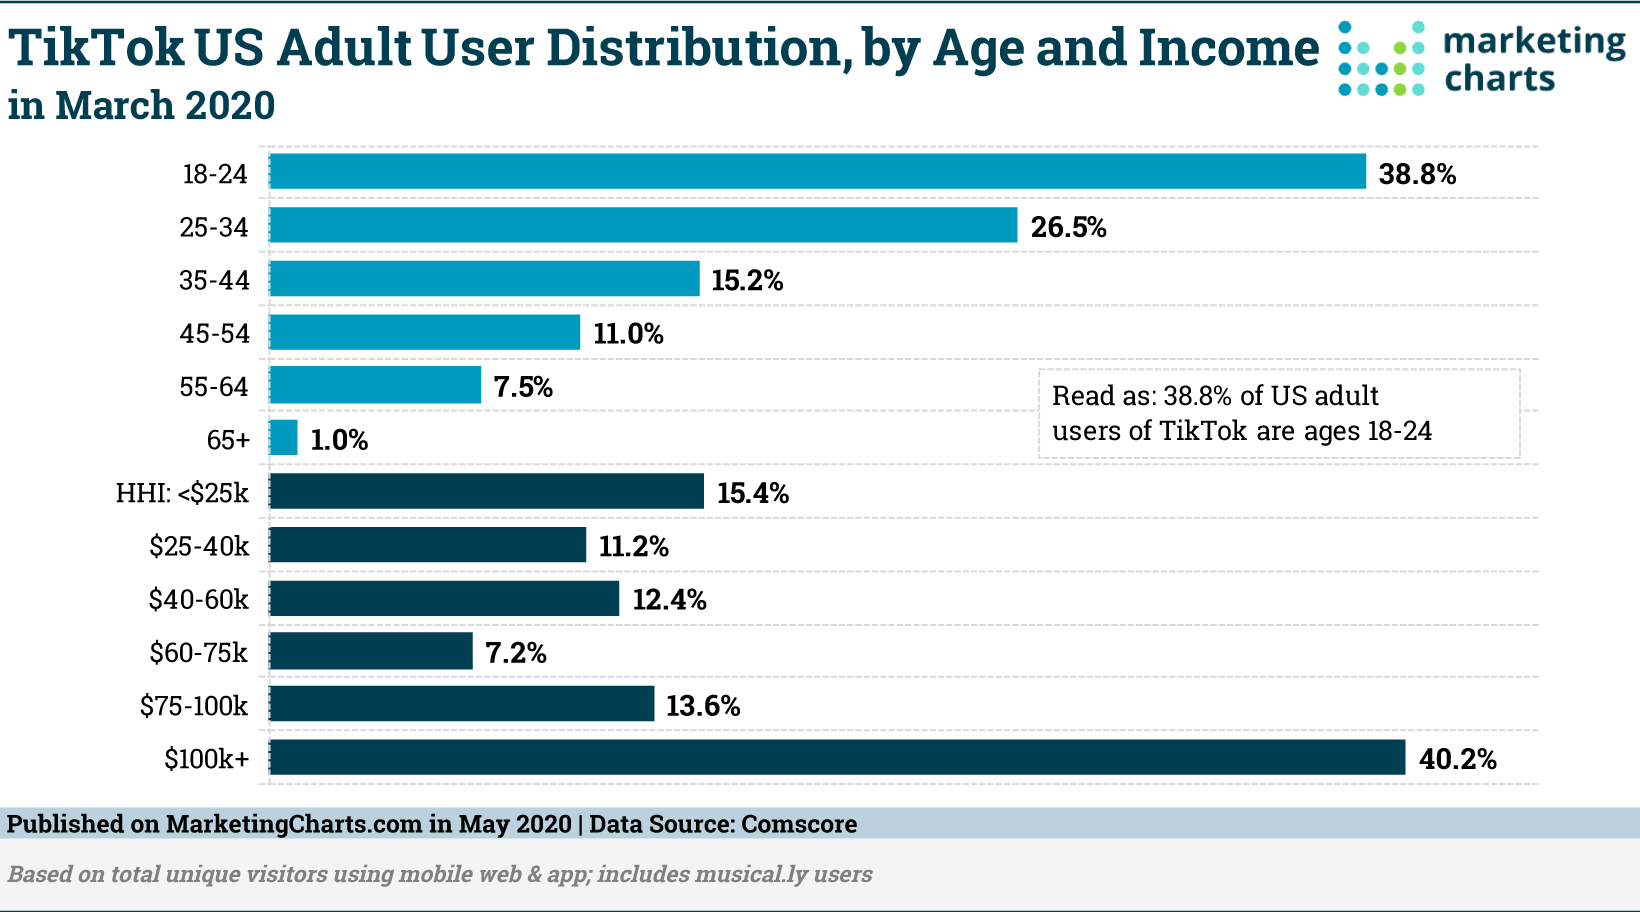 tiktok united states adult user distribution by age and income